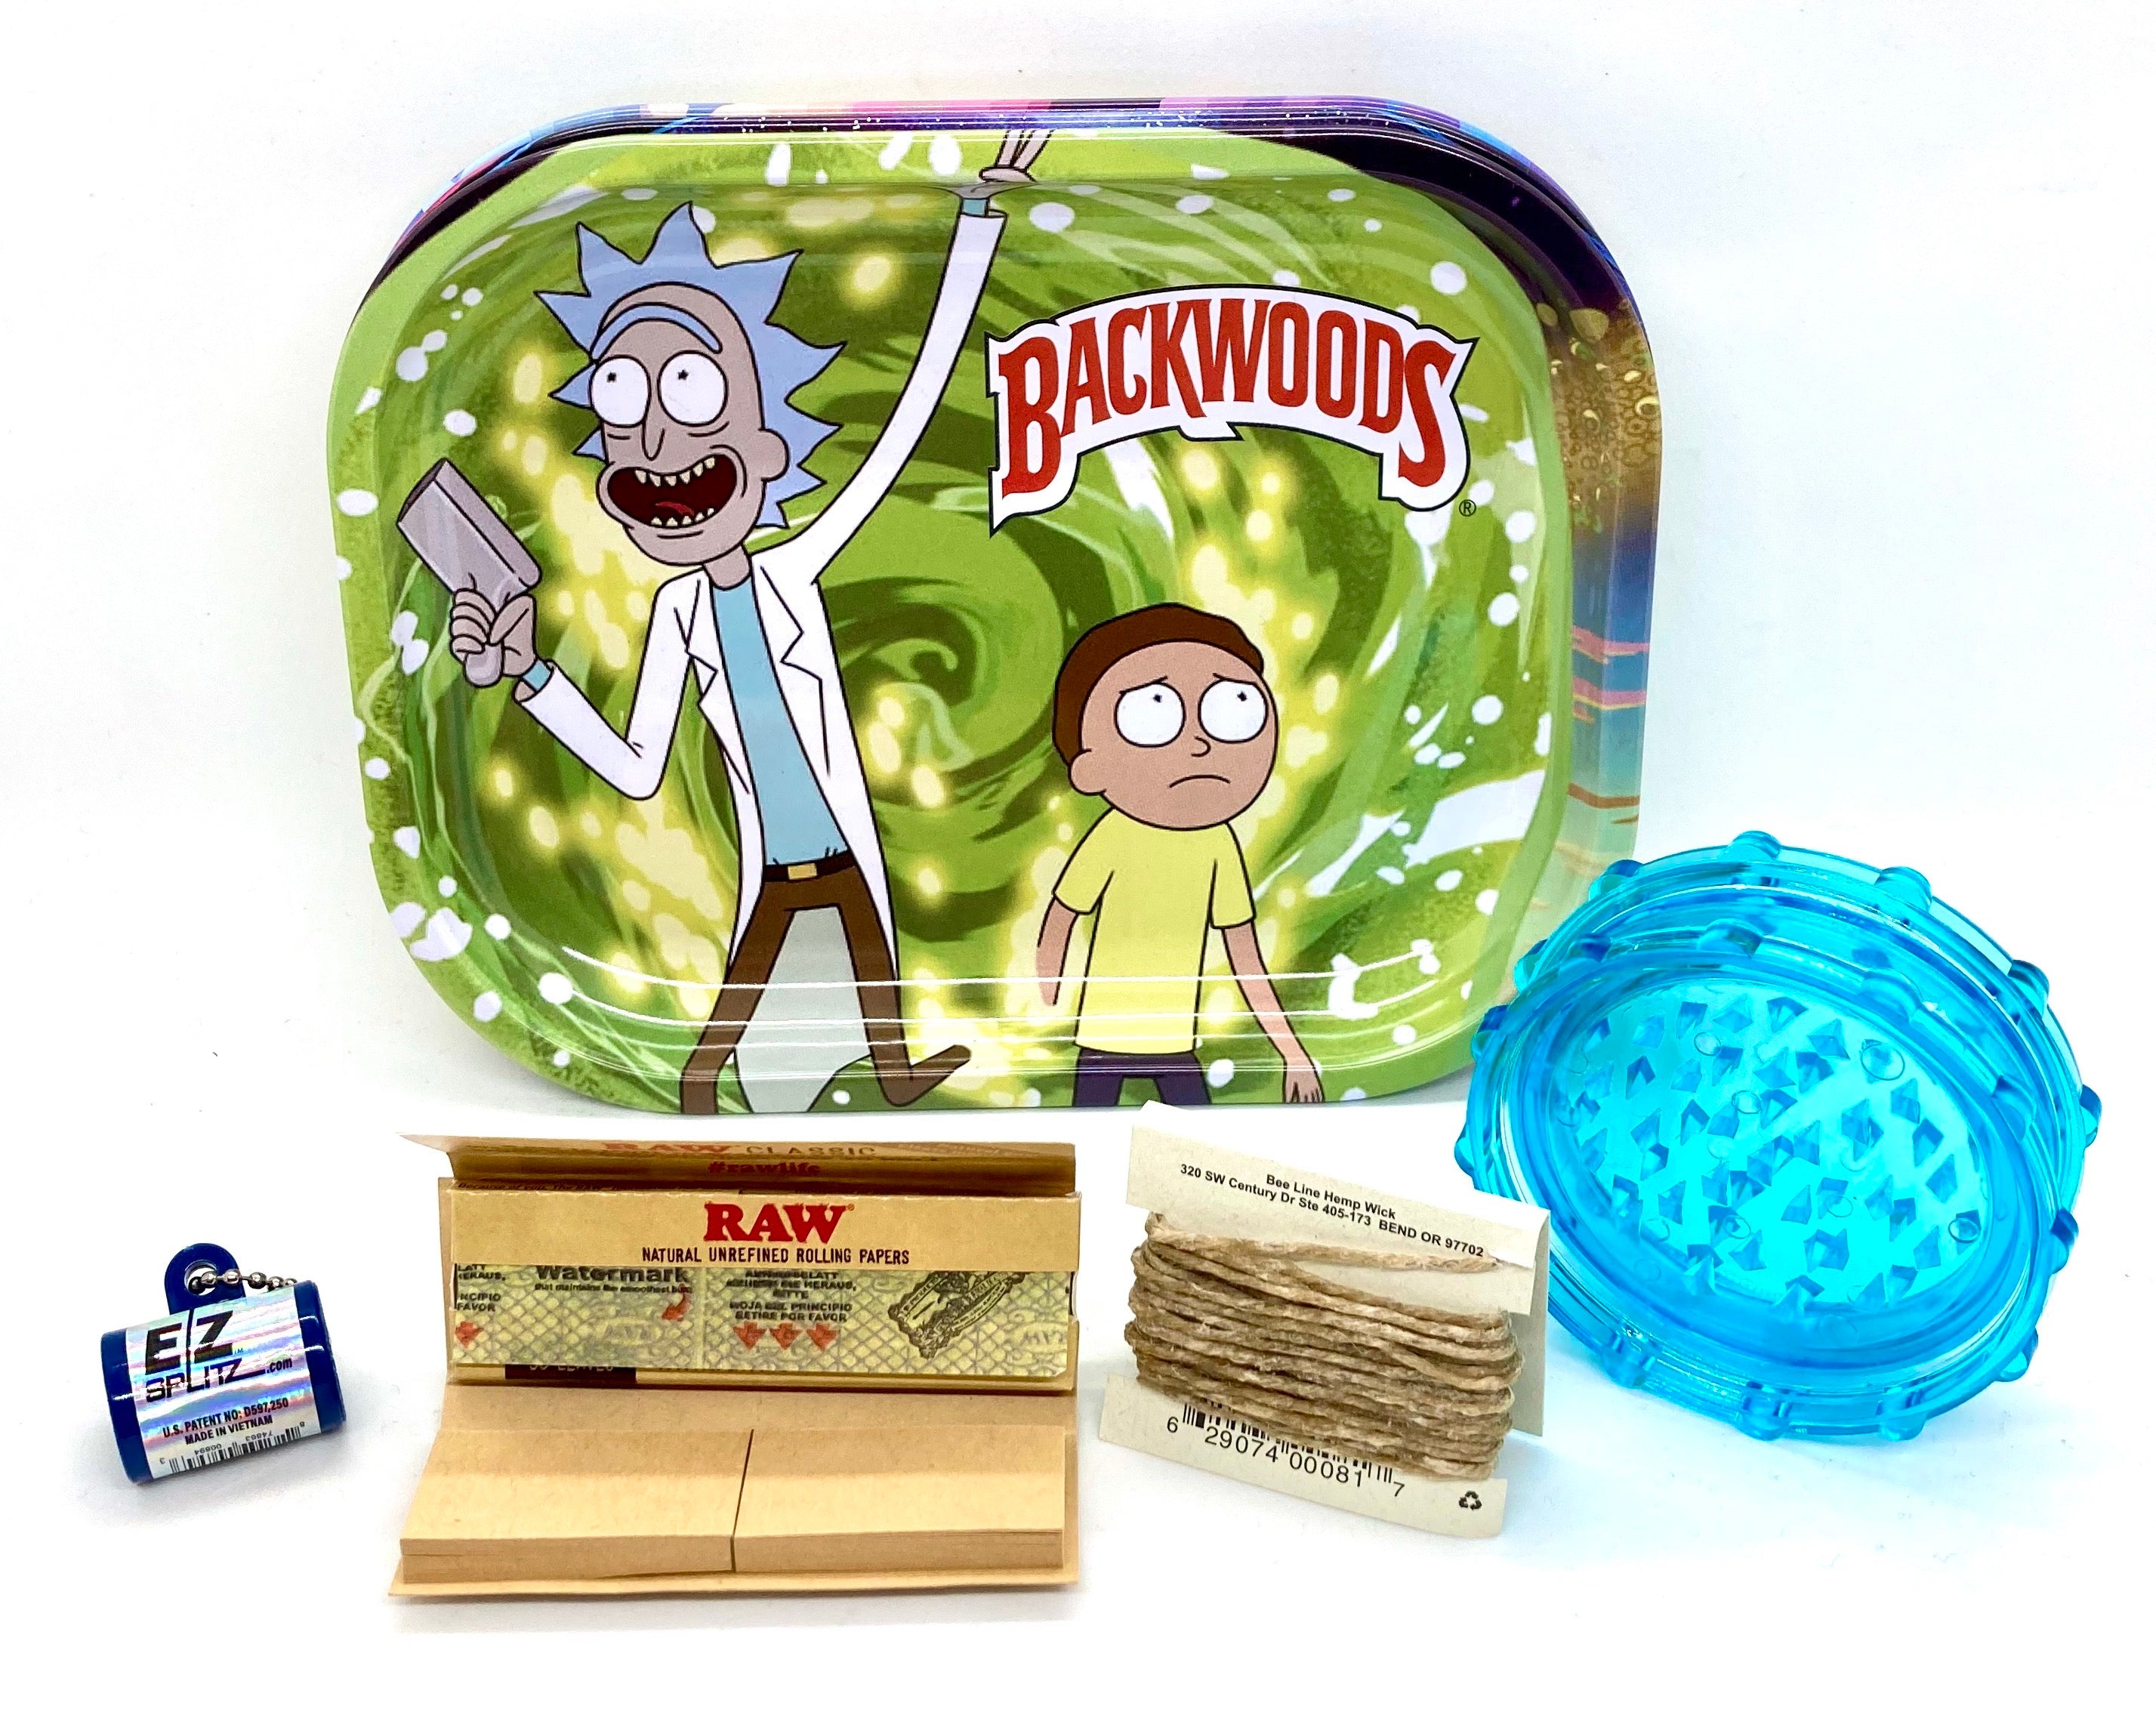 Select Distributors Rick and Morty Rolling Tray - C&J Hammer Hard  Accessories